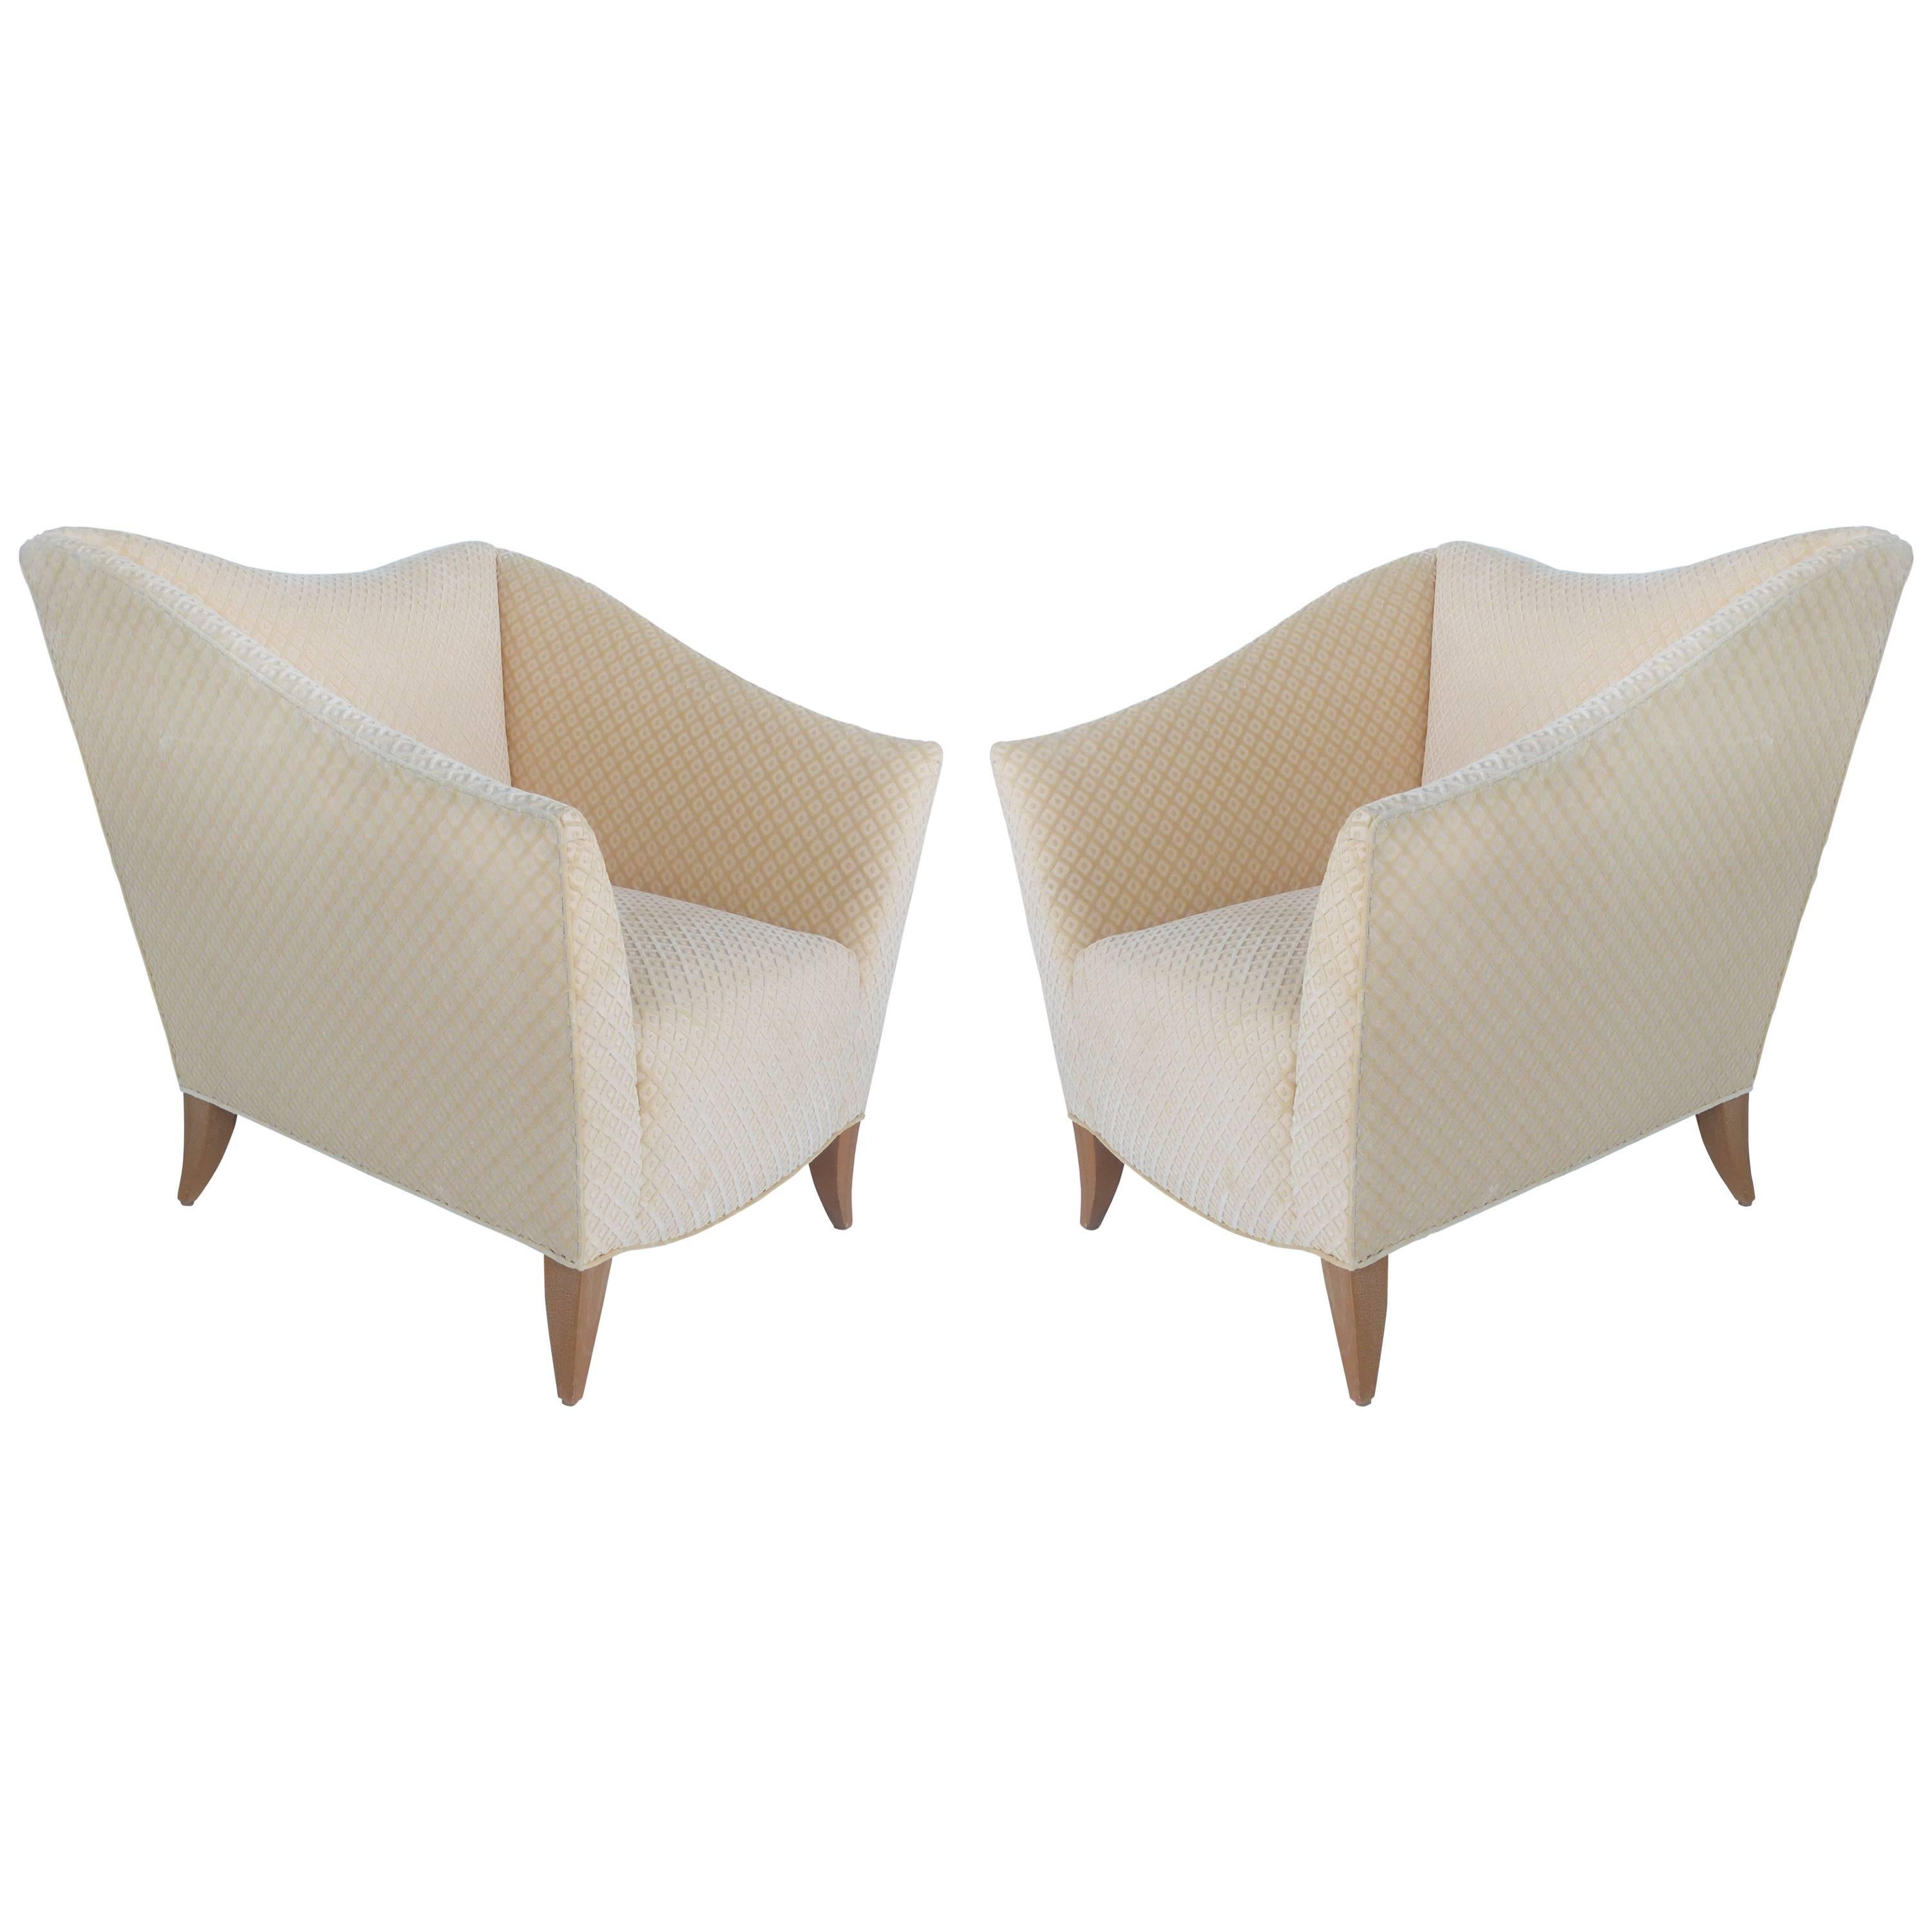 Sculptural Upholstered Club Chairs by Swaim, Pair